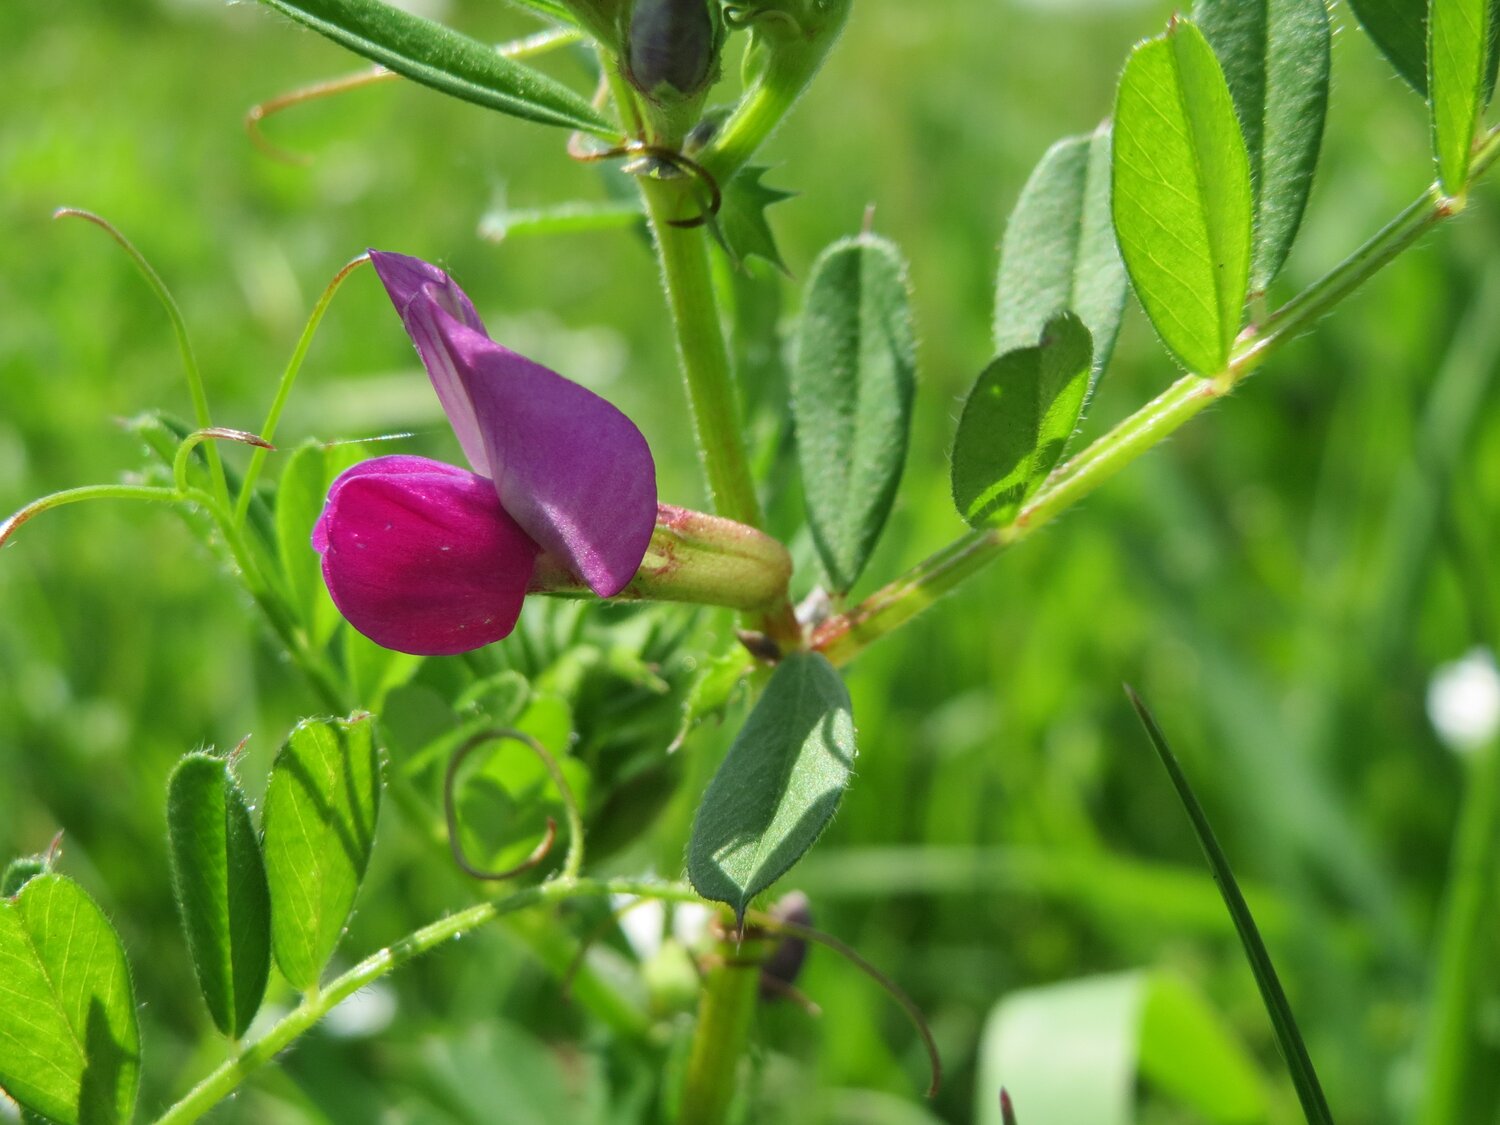 Deposited by both Slovakia and ICARDA, the common vetch plays an important but low-key role in the global food system. A member of the pea family, its ability to produce its own fertilizer makes it useful in rotations, and it also provides palatable forage for livestock. 